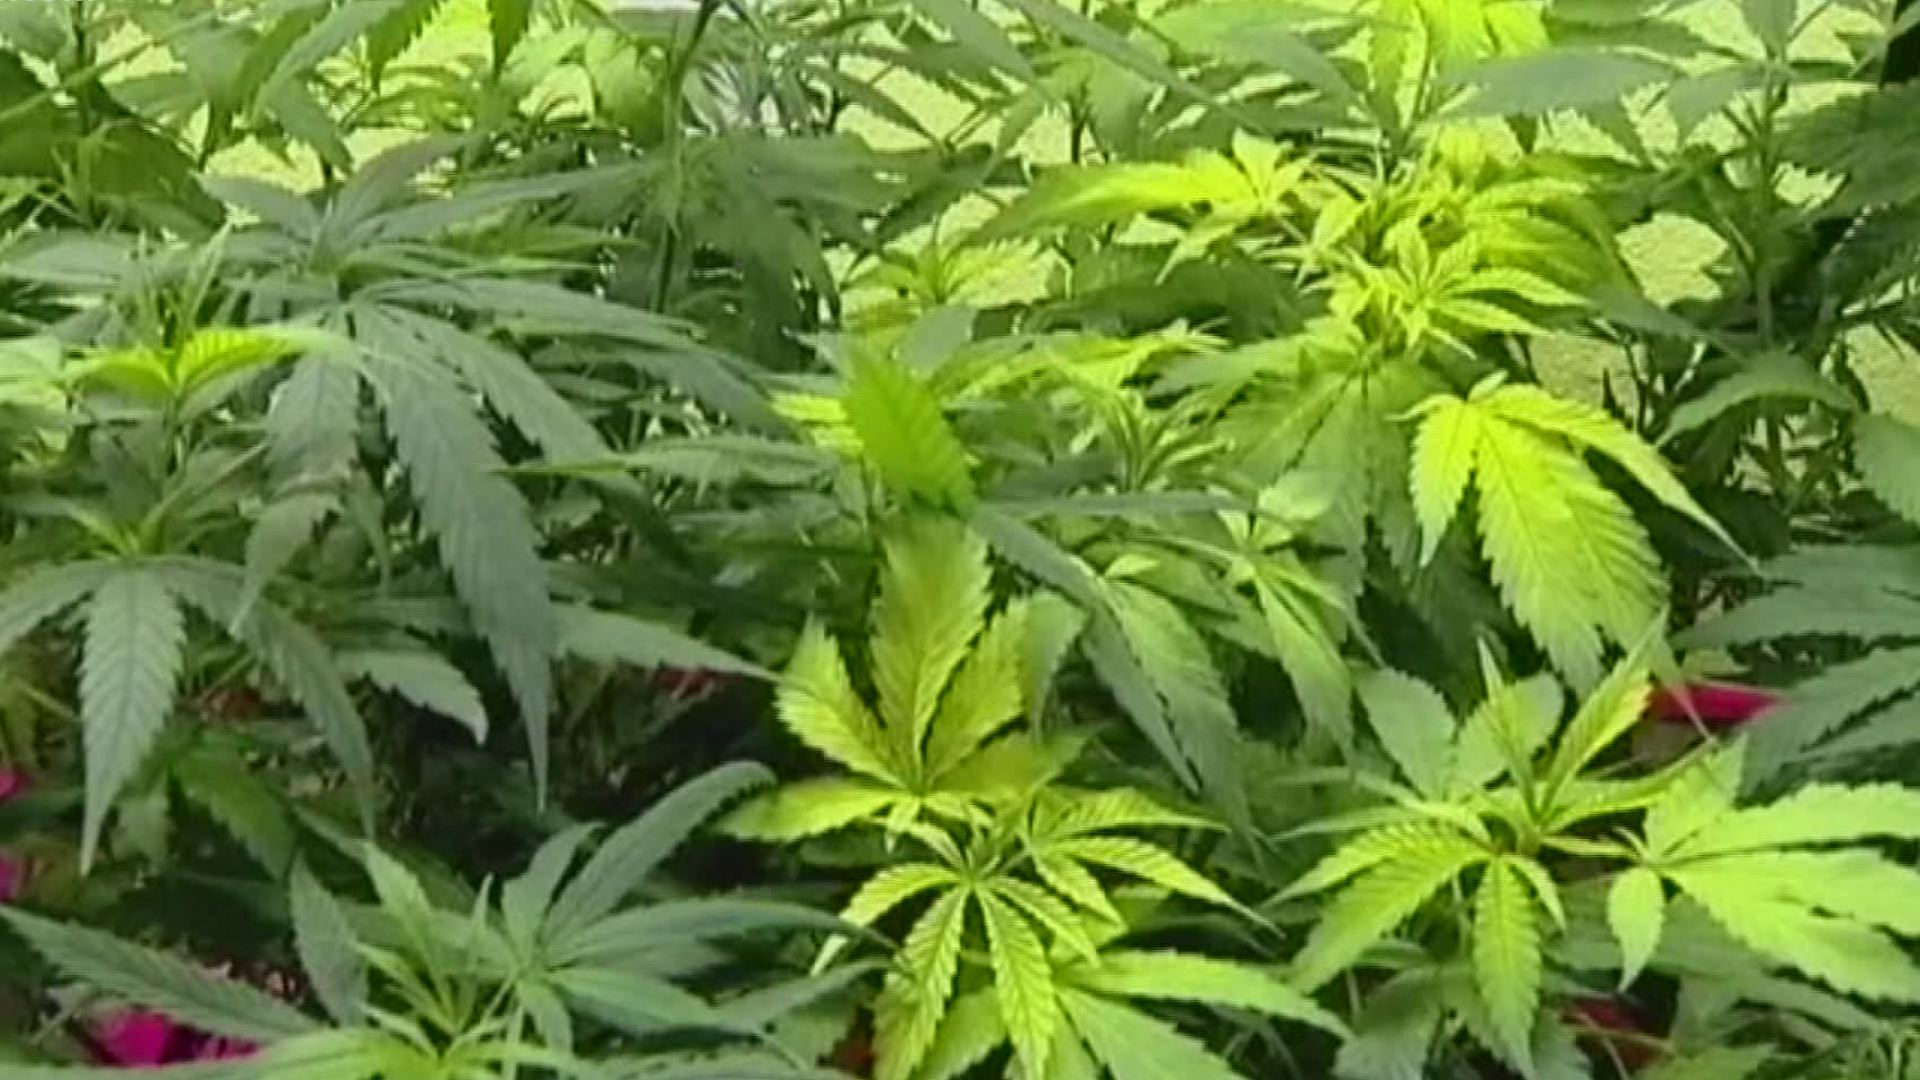 Senators will discuss a bill Wednesday that would legalize marijuana in North Carolina to treat a number of ailments.